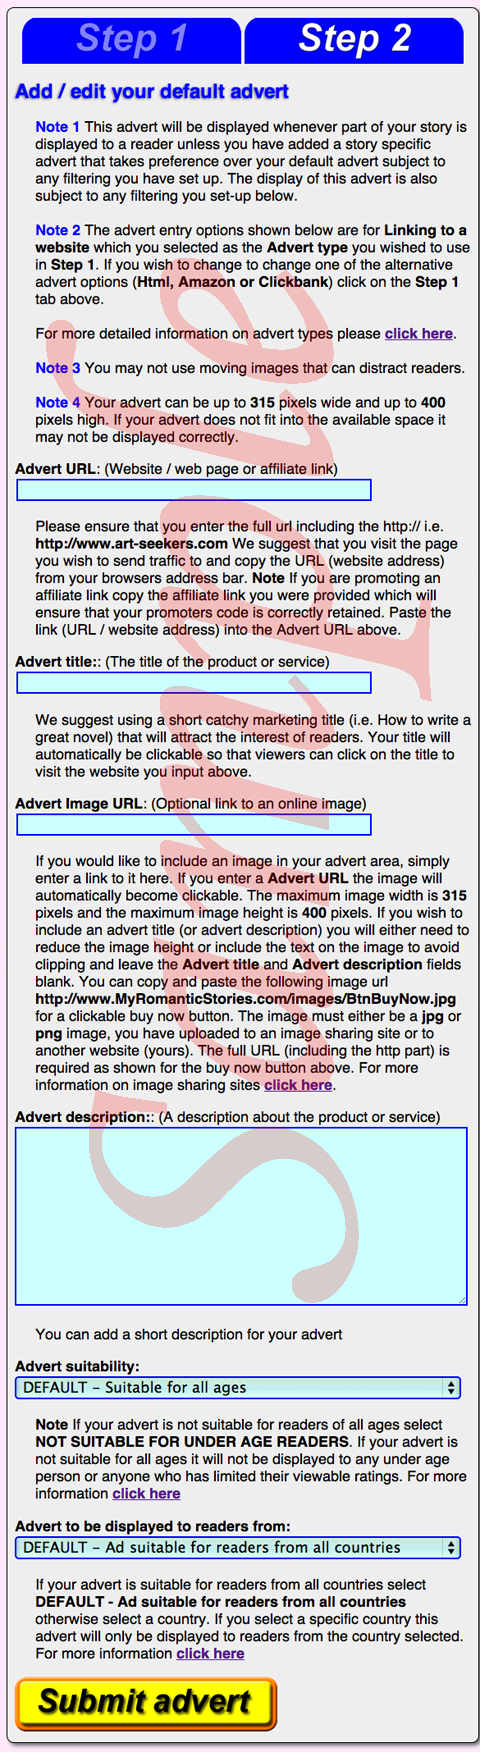 This is a screen shot image of the entry form. To enter your advert visit the Add/Edit your adverts page under your area.